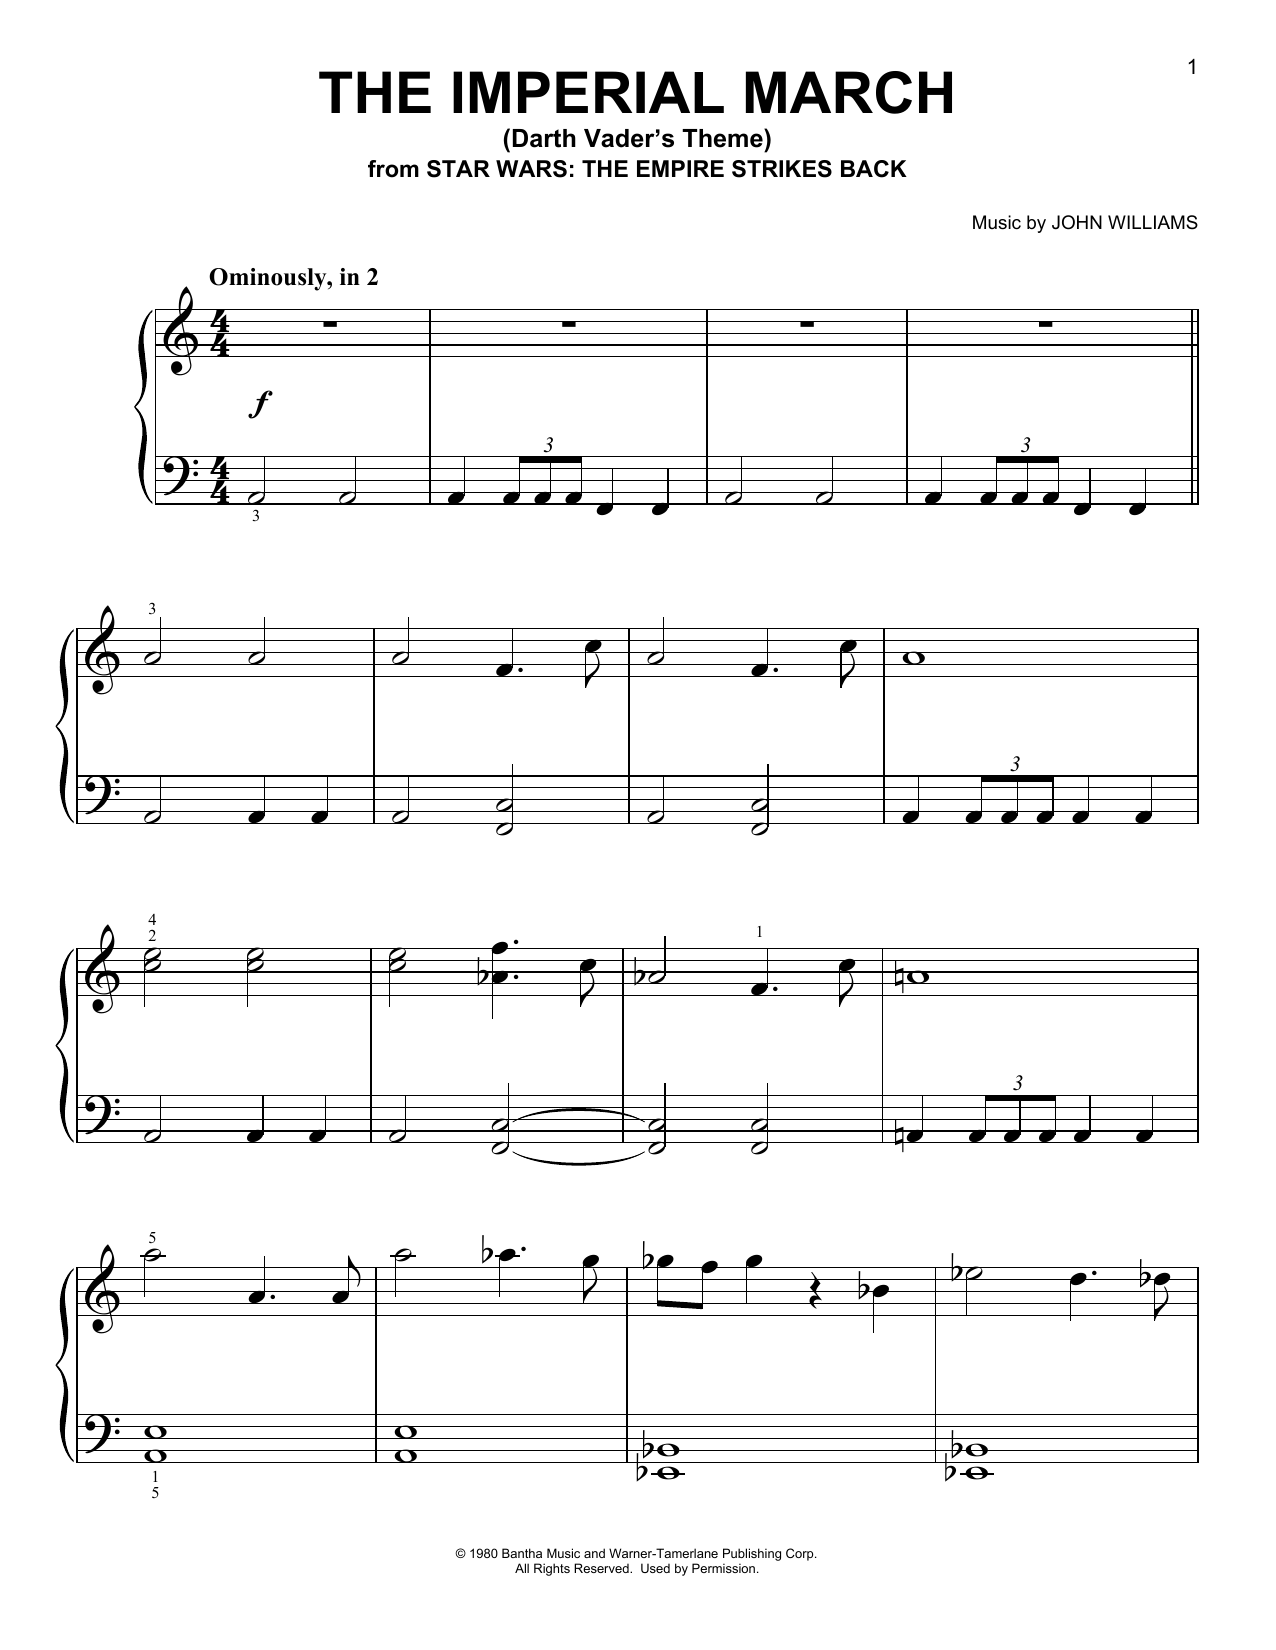 Download John Williams The Imperial March (Darth Vader's Theme Sheet Music